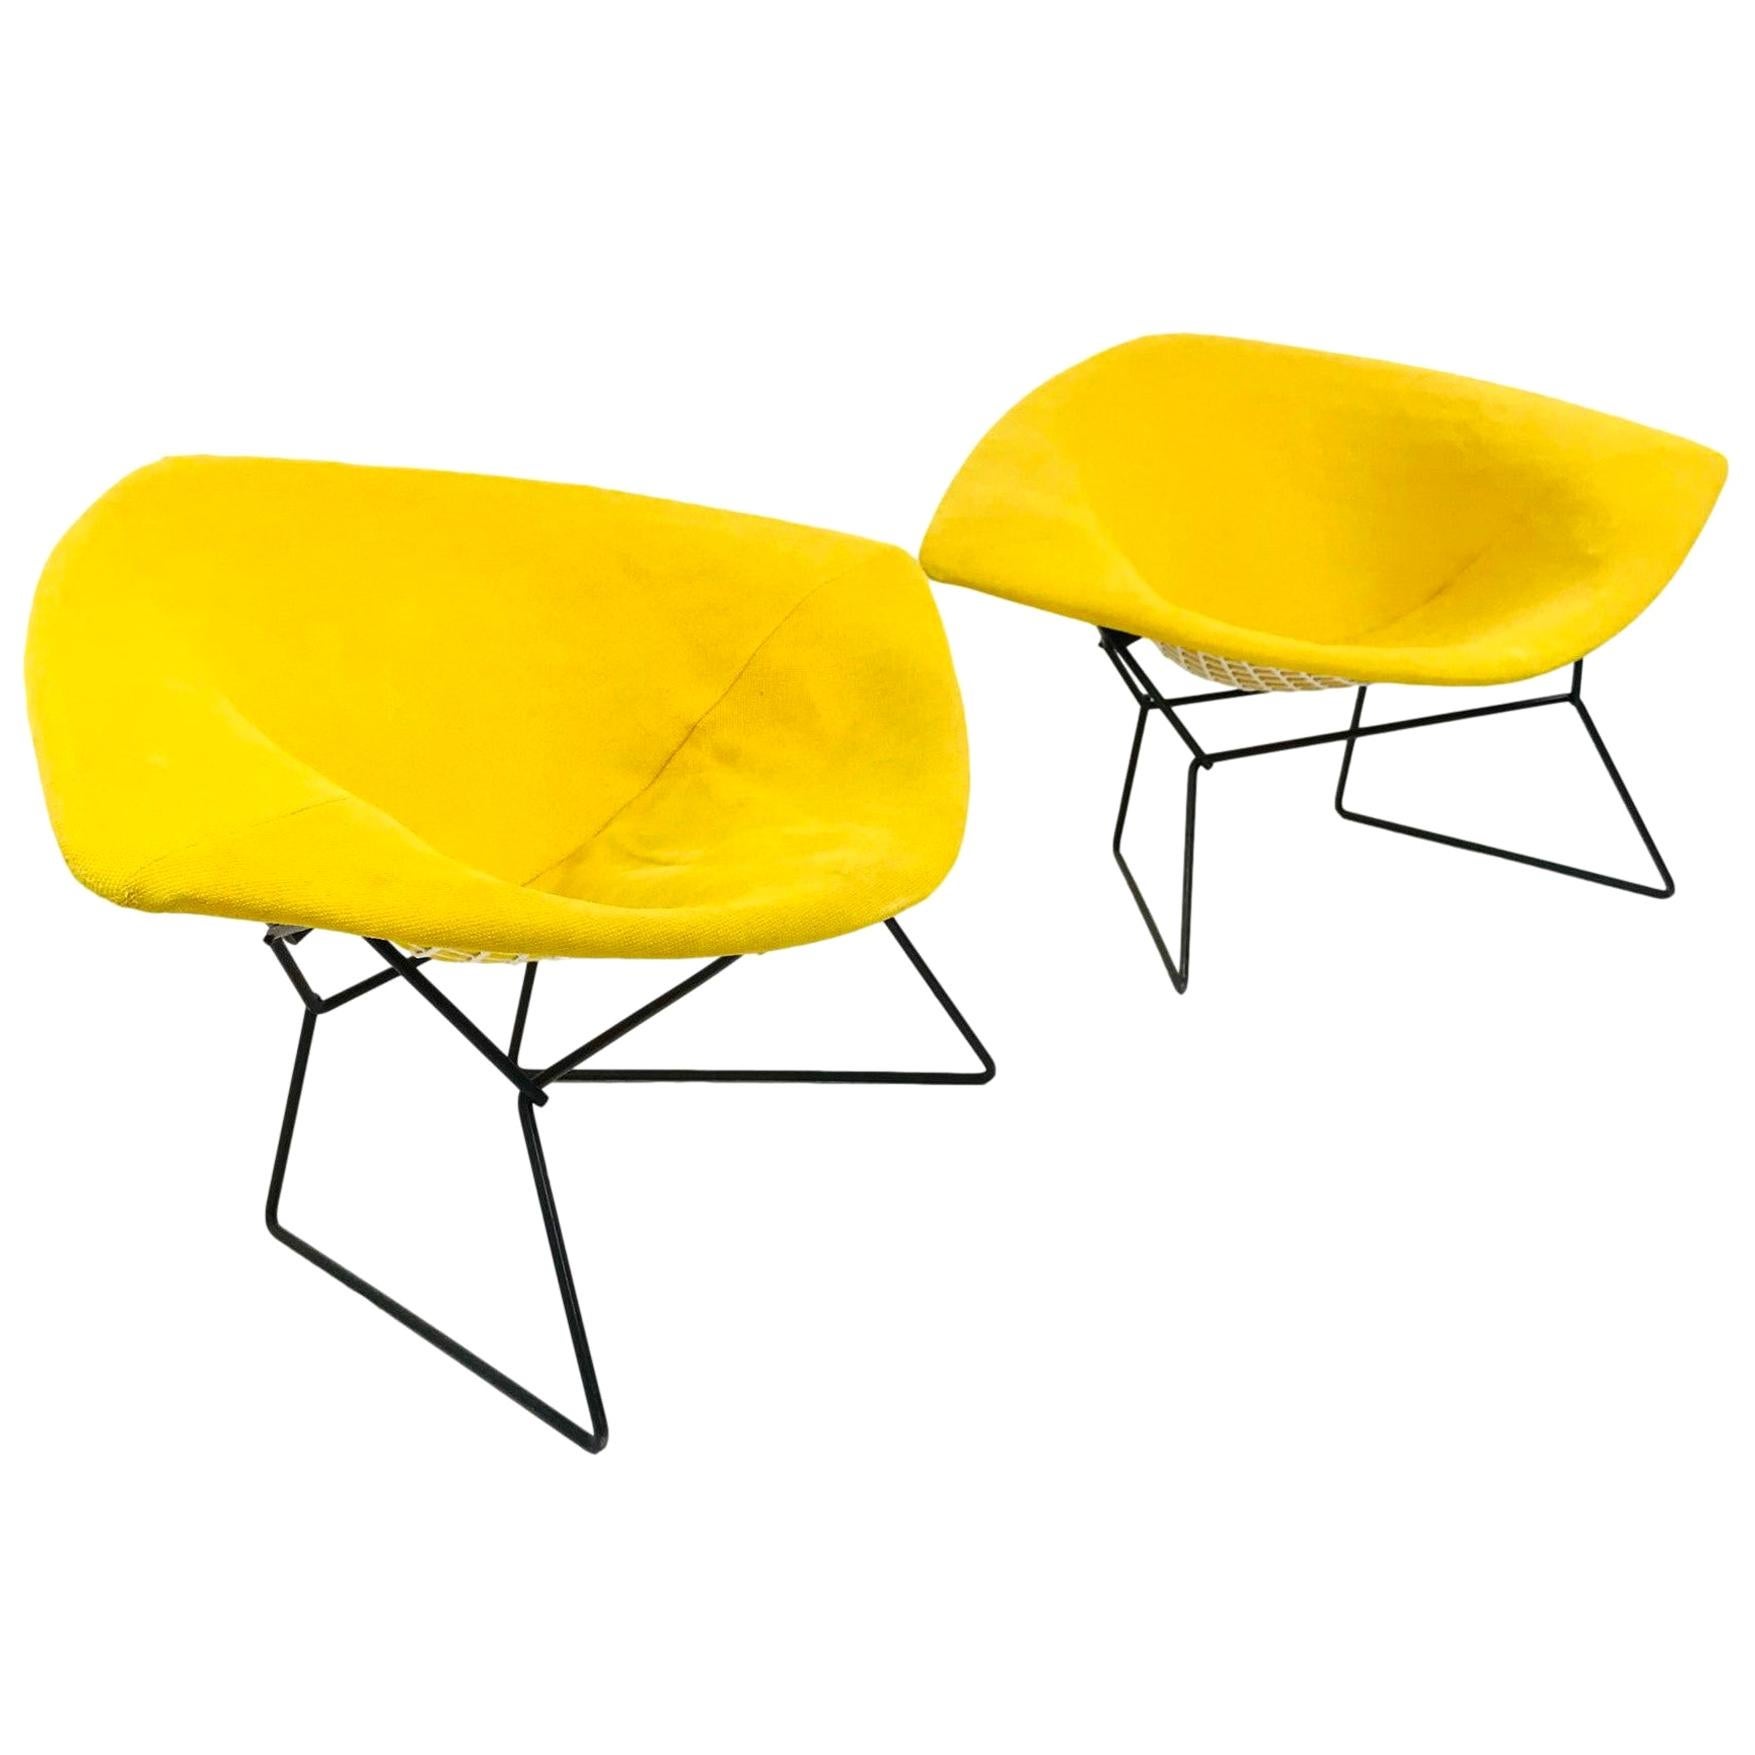 Pair of Large Diamond Chairs by Harry Bertoia for Knoll